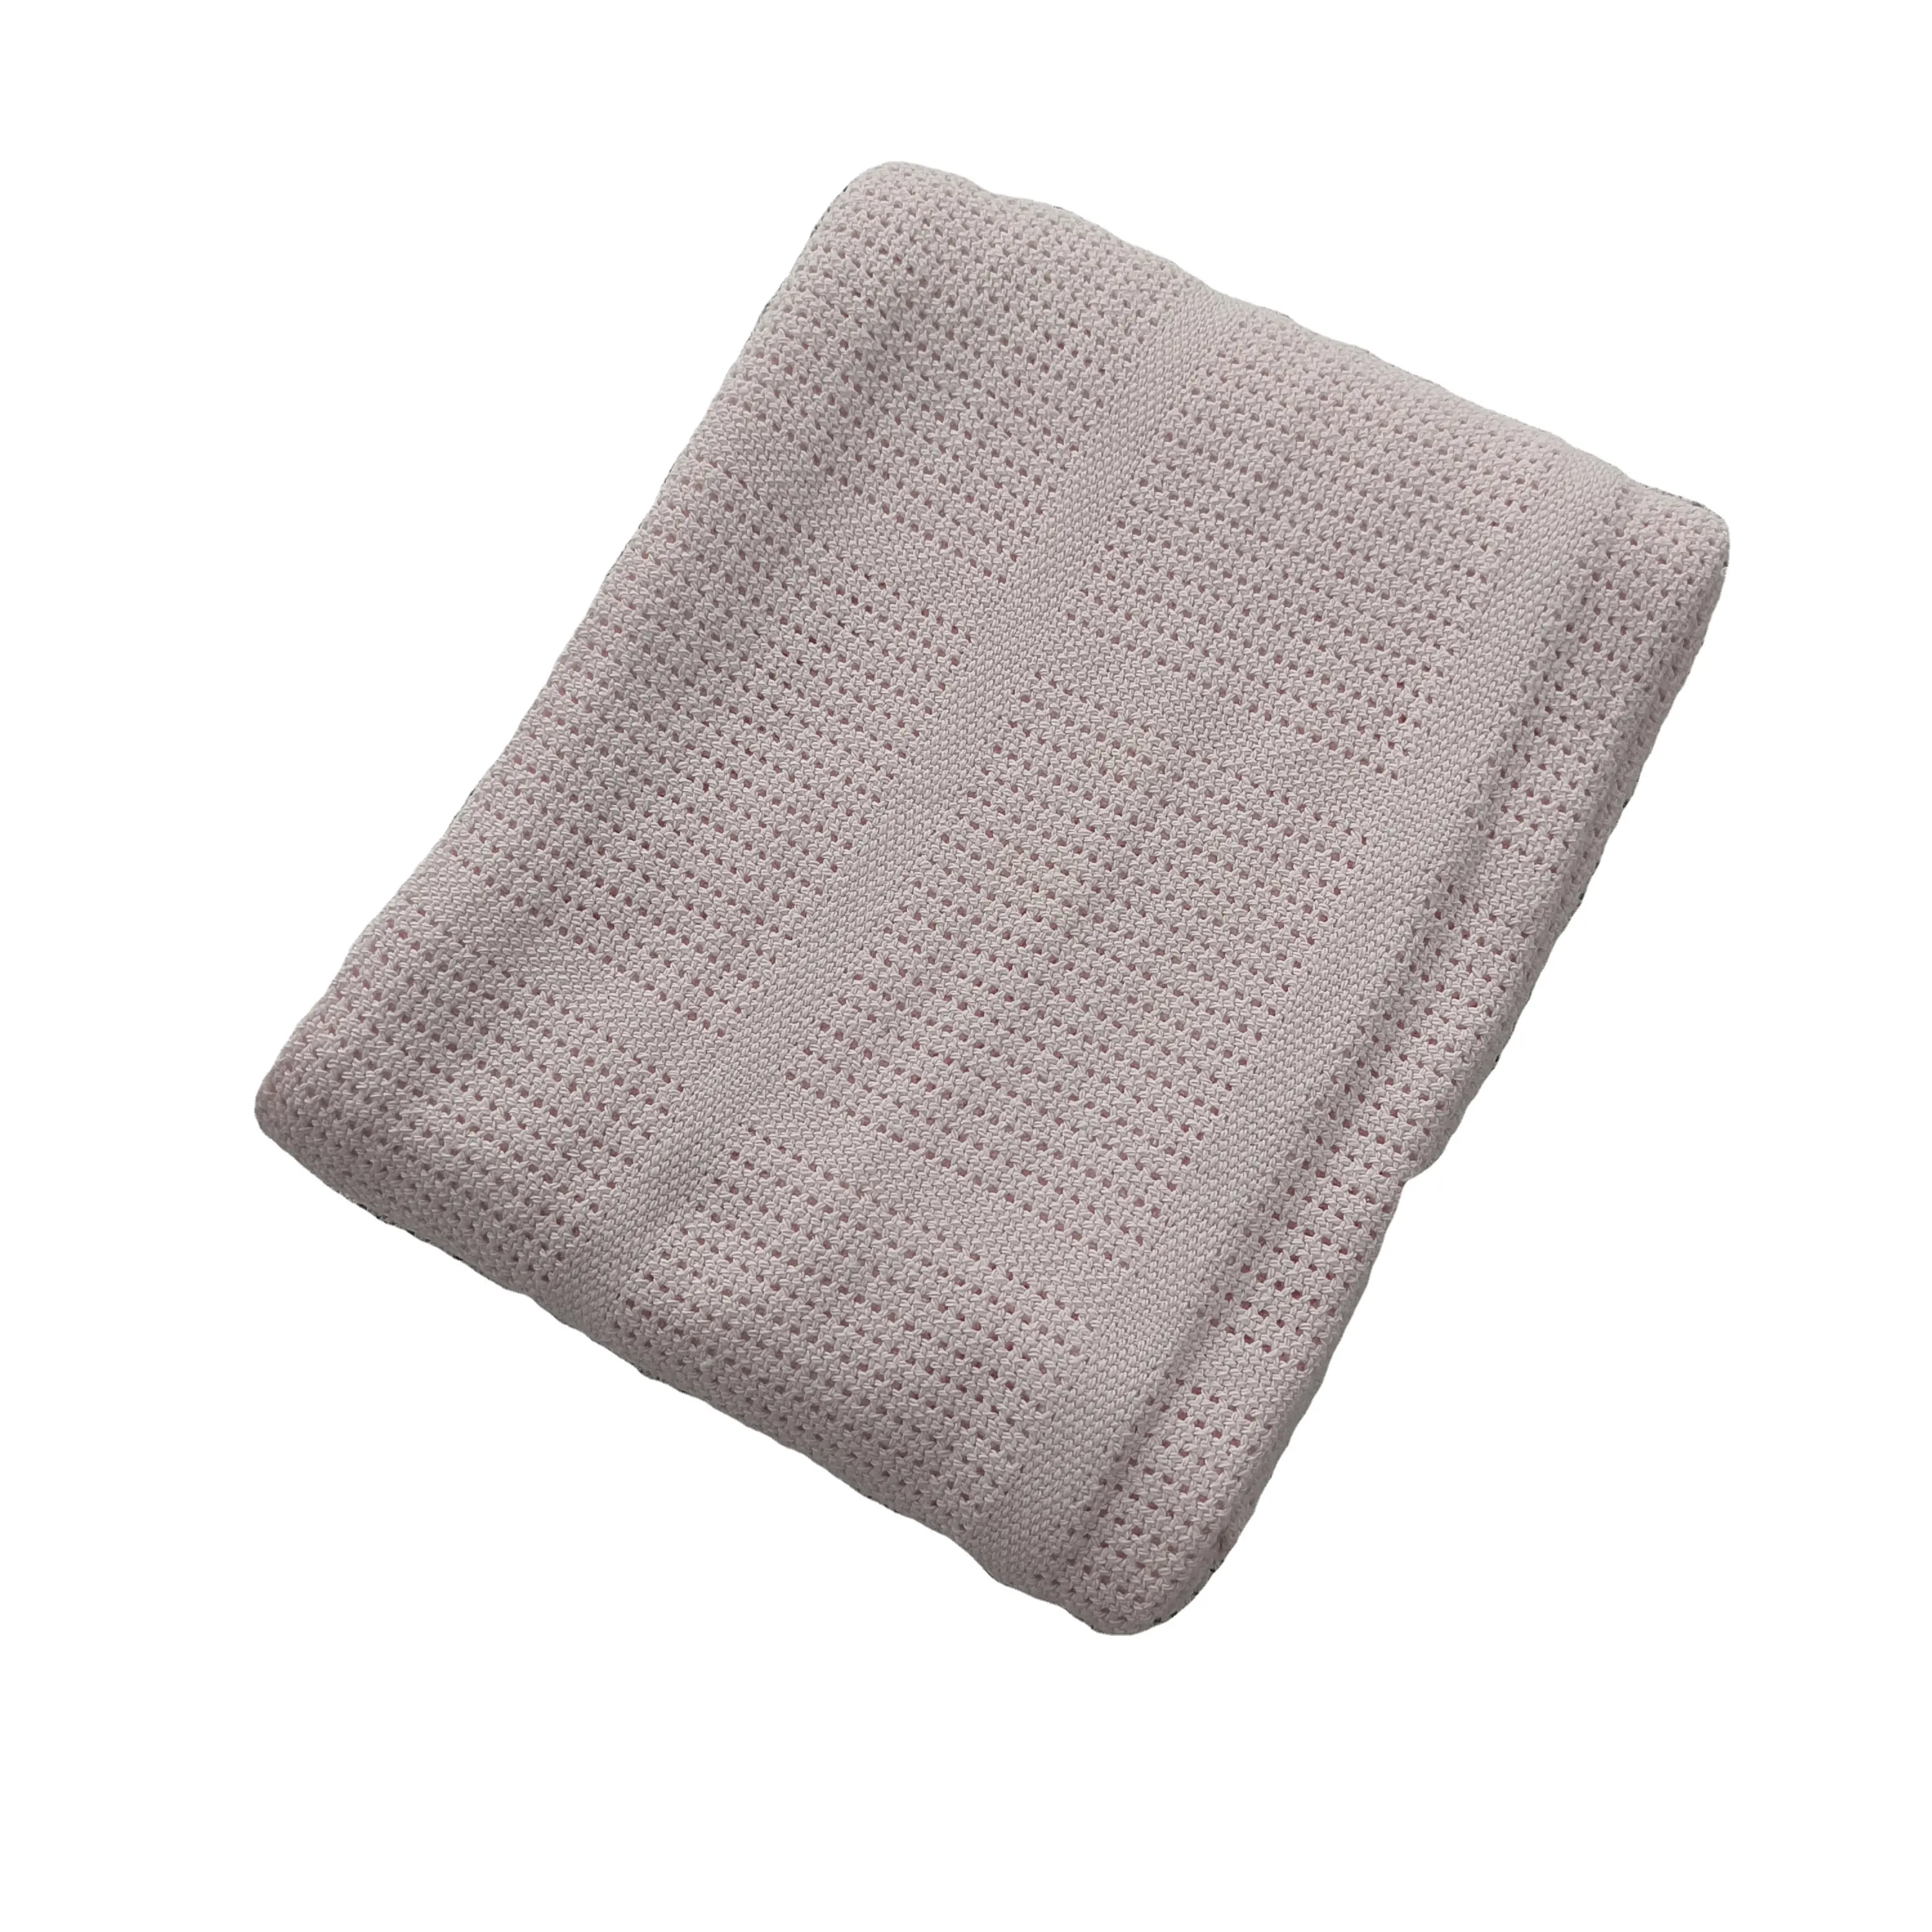 Size 100% bamboo Thermal Baby Blanket Breathable Throws And Blanket Cellular Weave Waffle Blanket